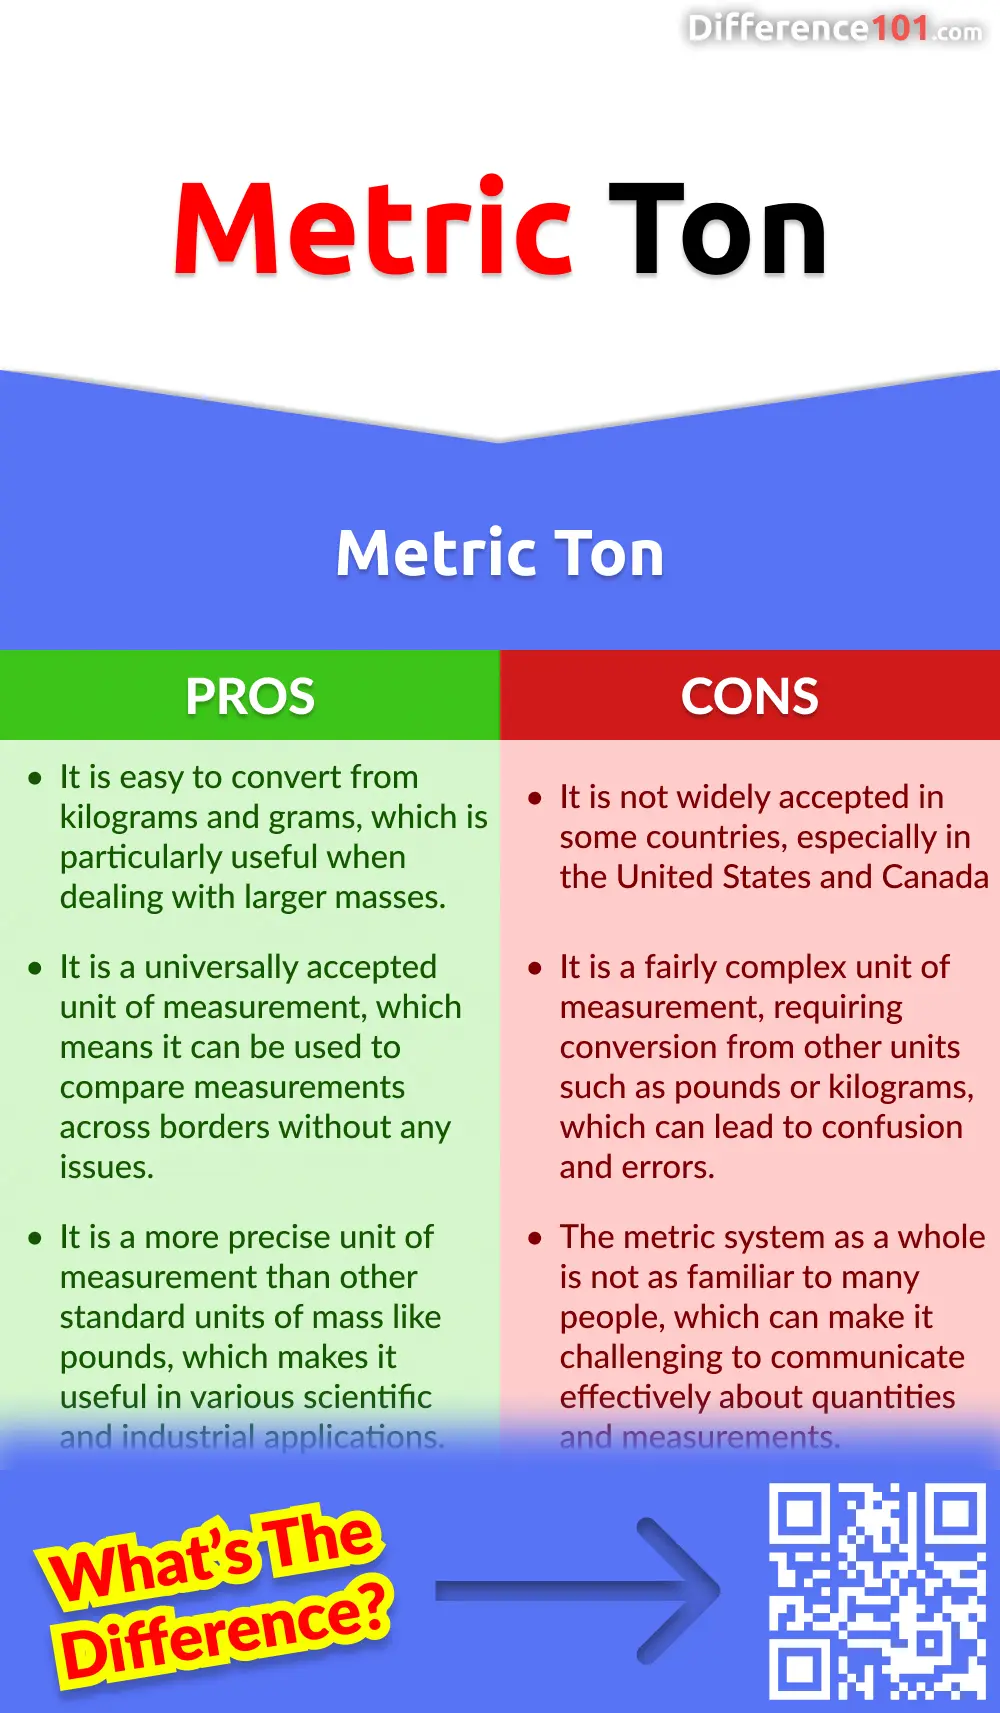 stenografi hjem Reproducere Ton vs. Metric Ton: 5 Key Differences, Pros & Cons, Similarities |  Difference 101